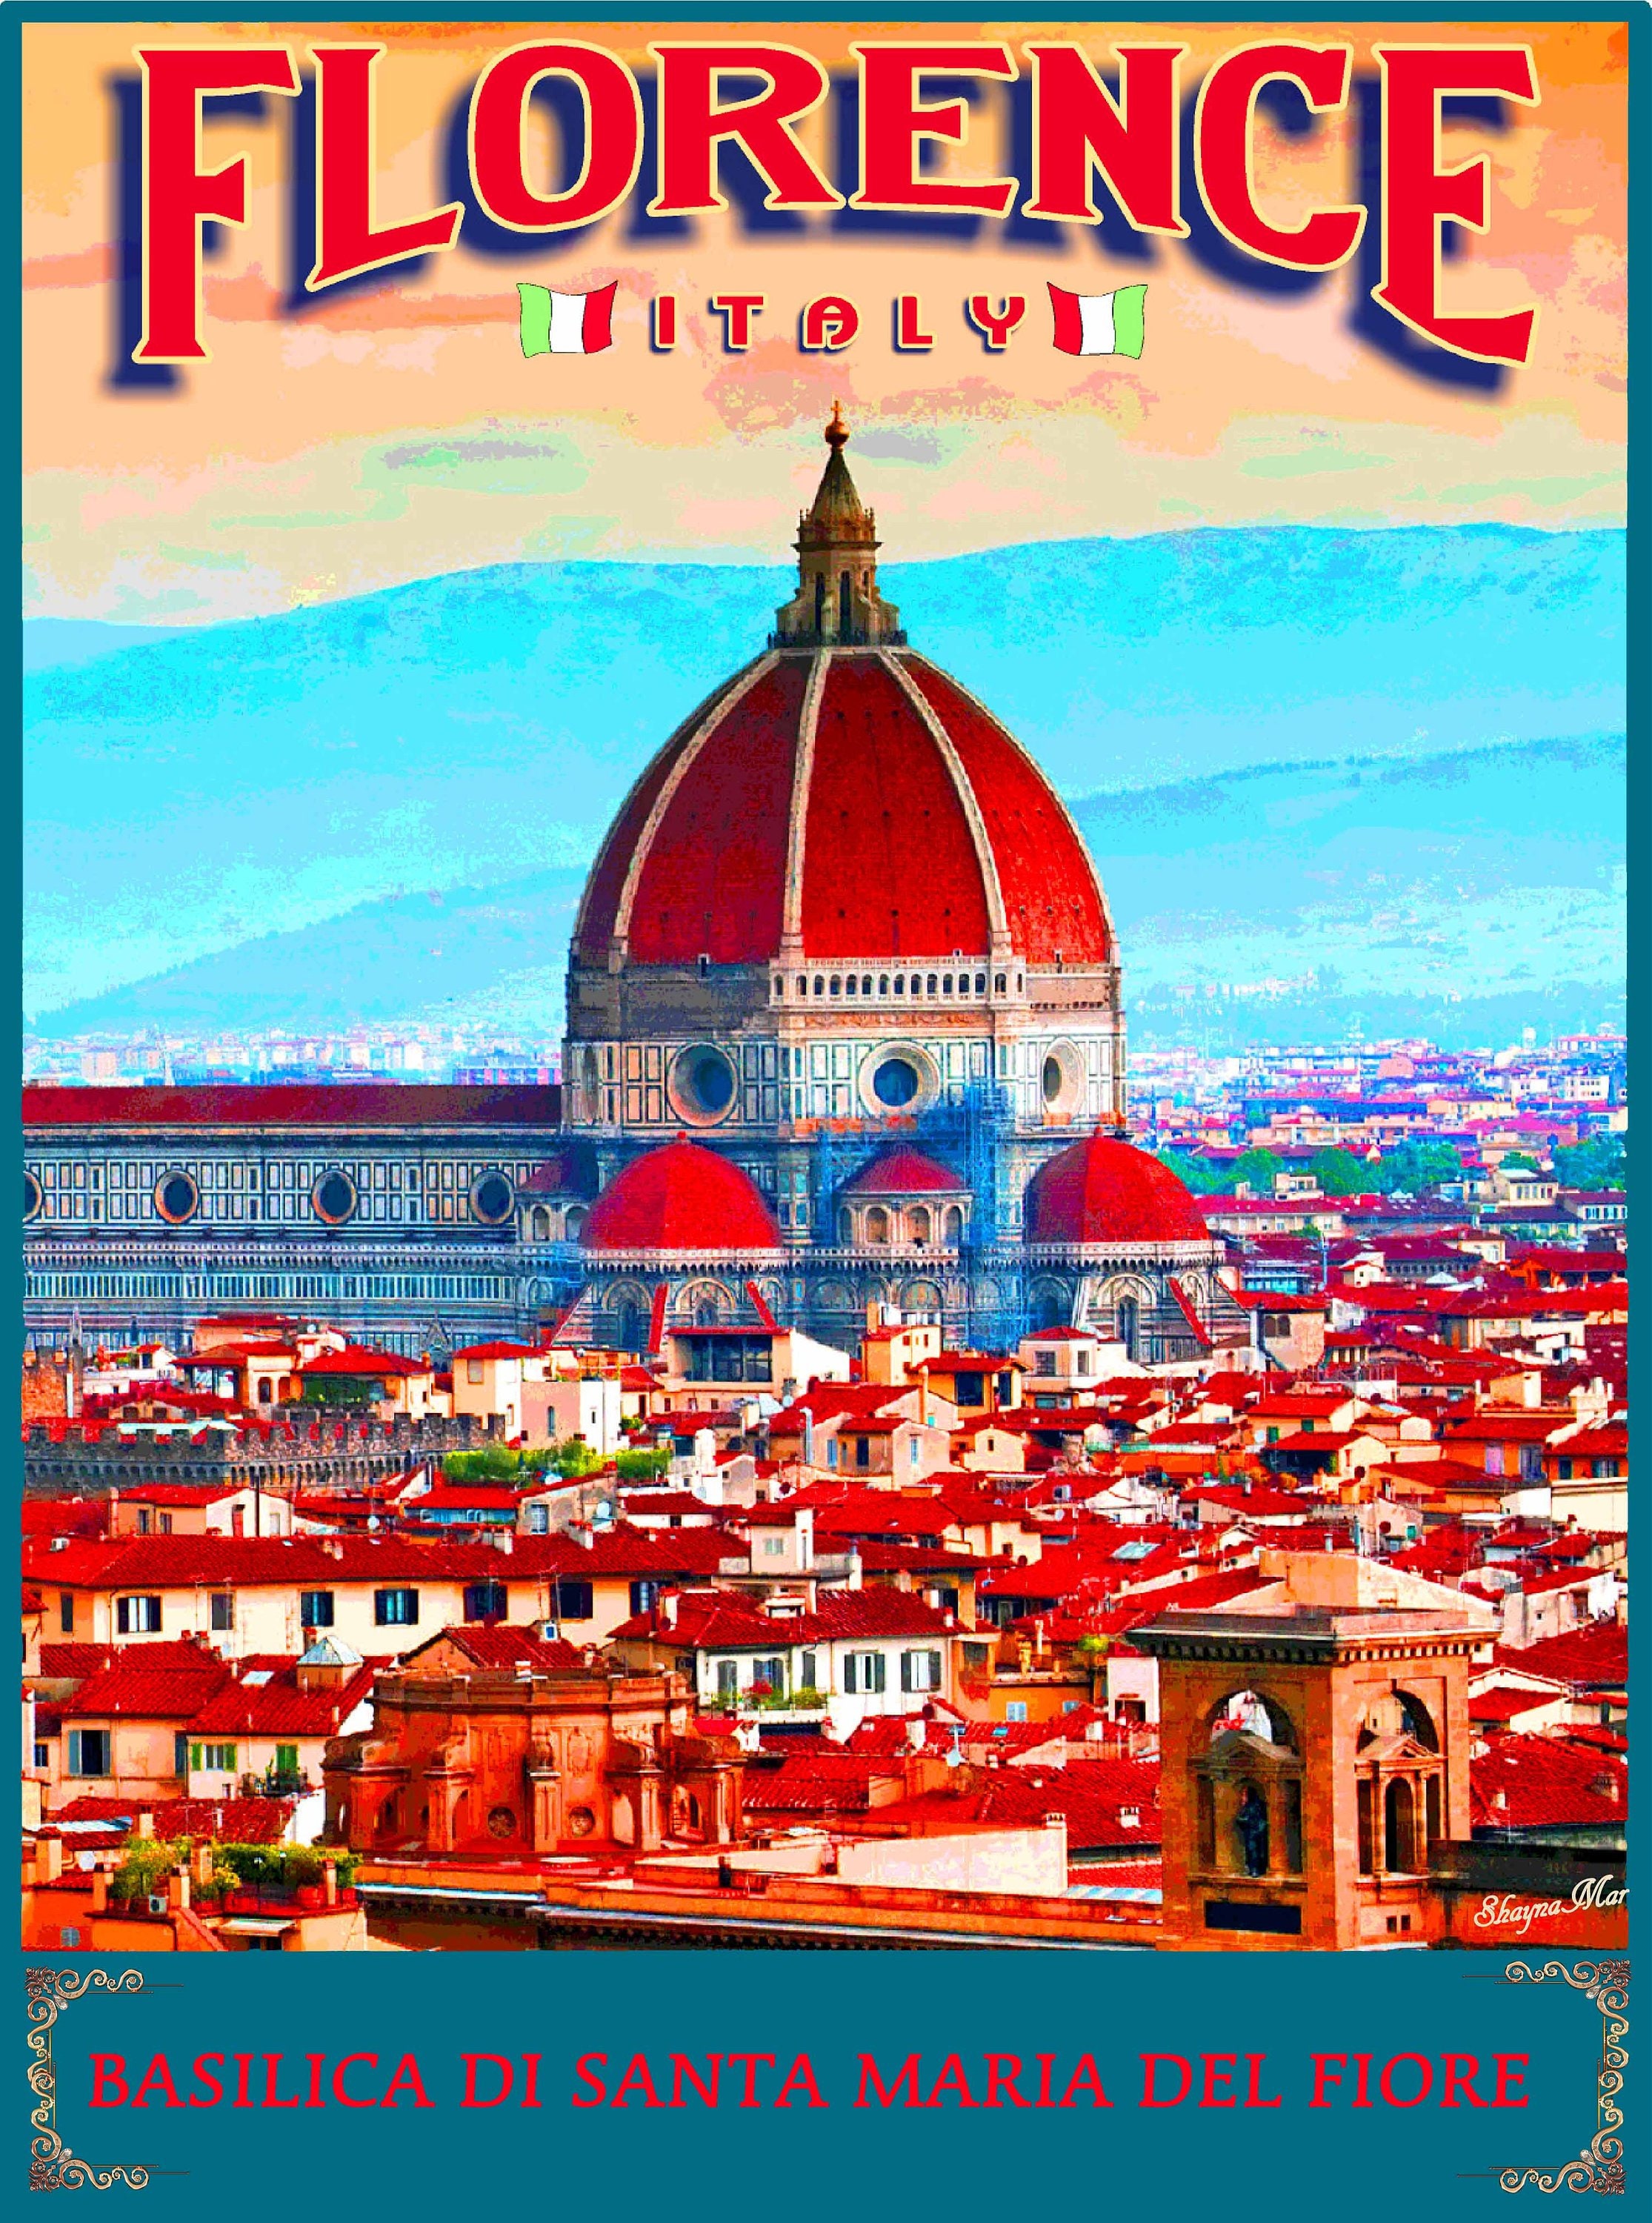 florence travel ad